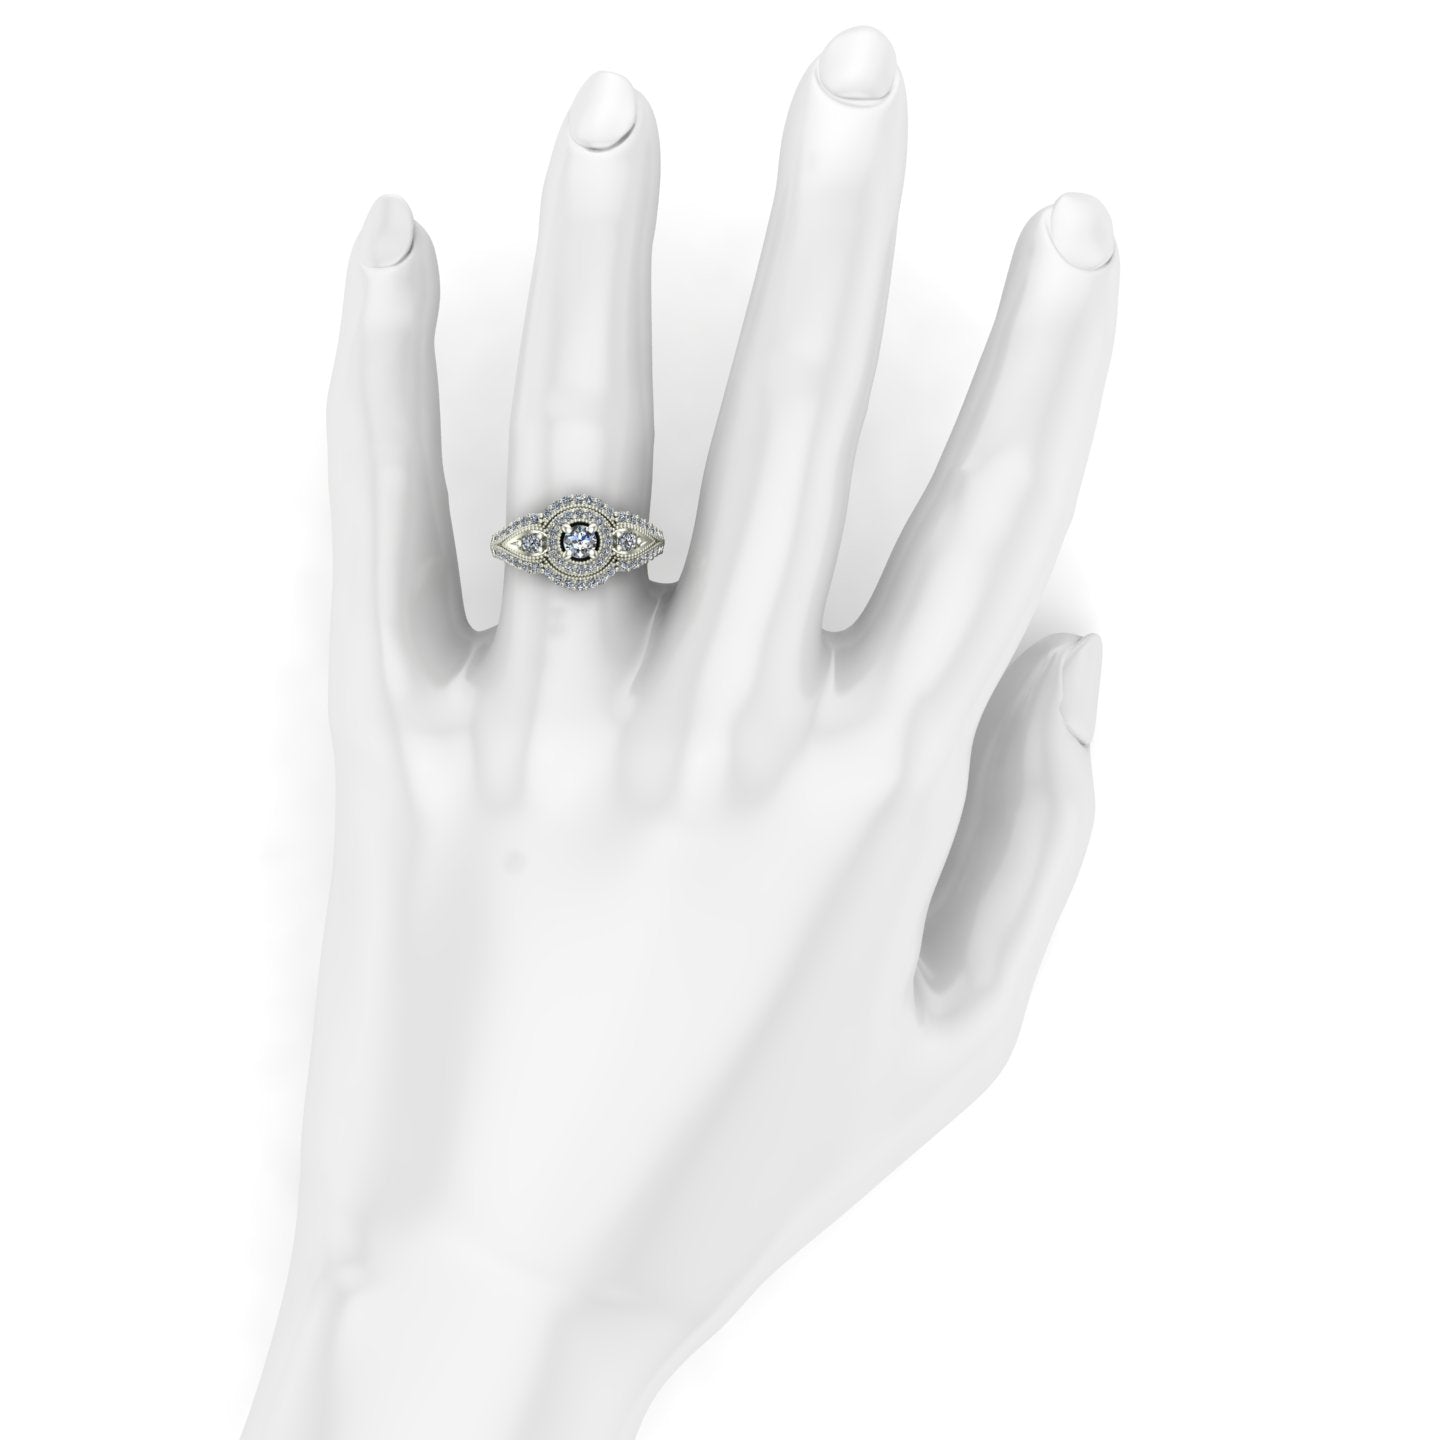 Diamond halo engagement ring with diamond border in 14k white gold - Charles Babb Designs - on hand